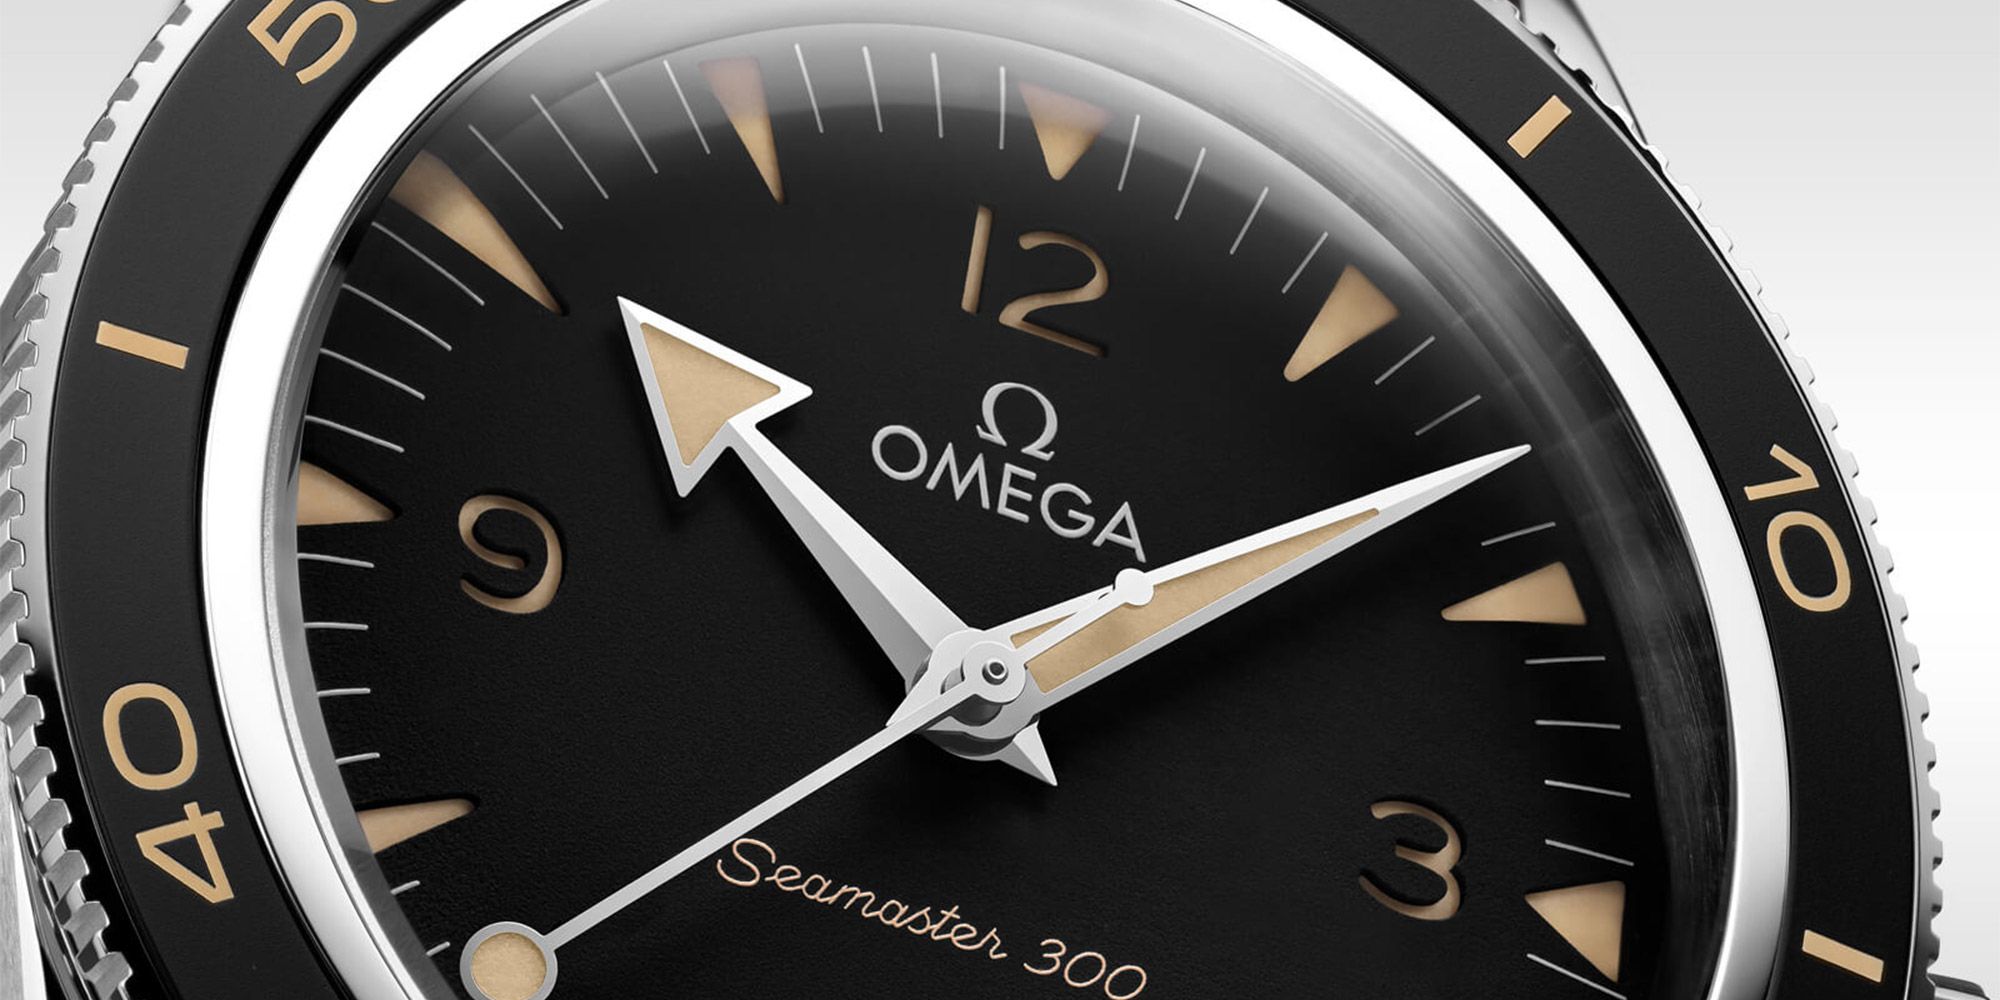 There Is an OMEGA Watch for Every Occasion